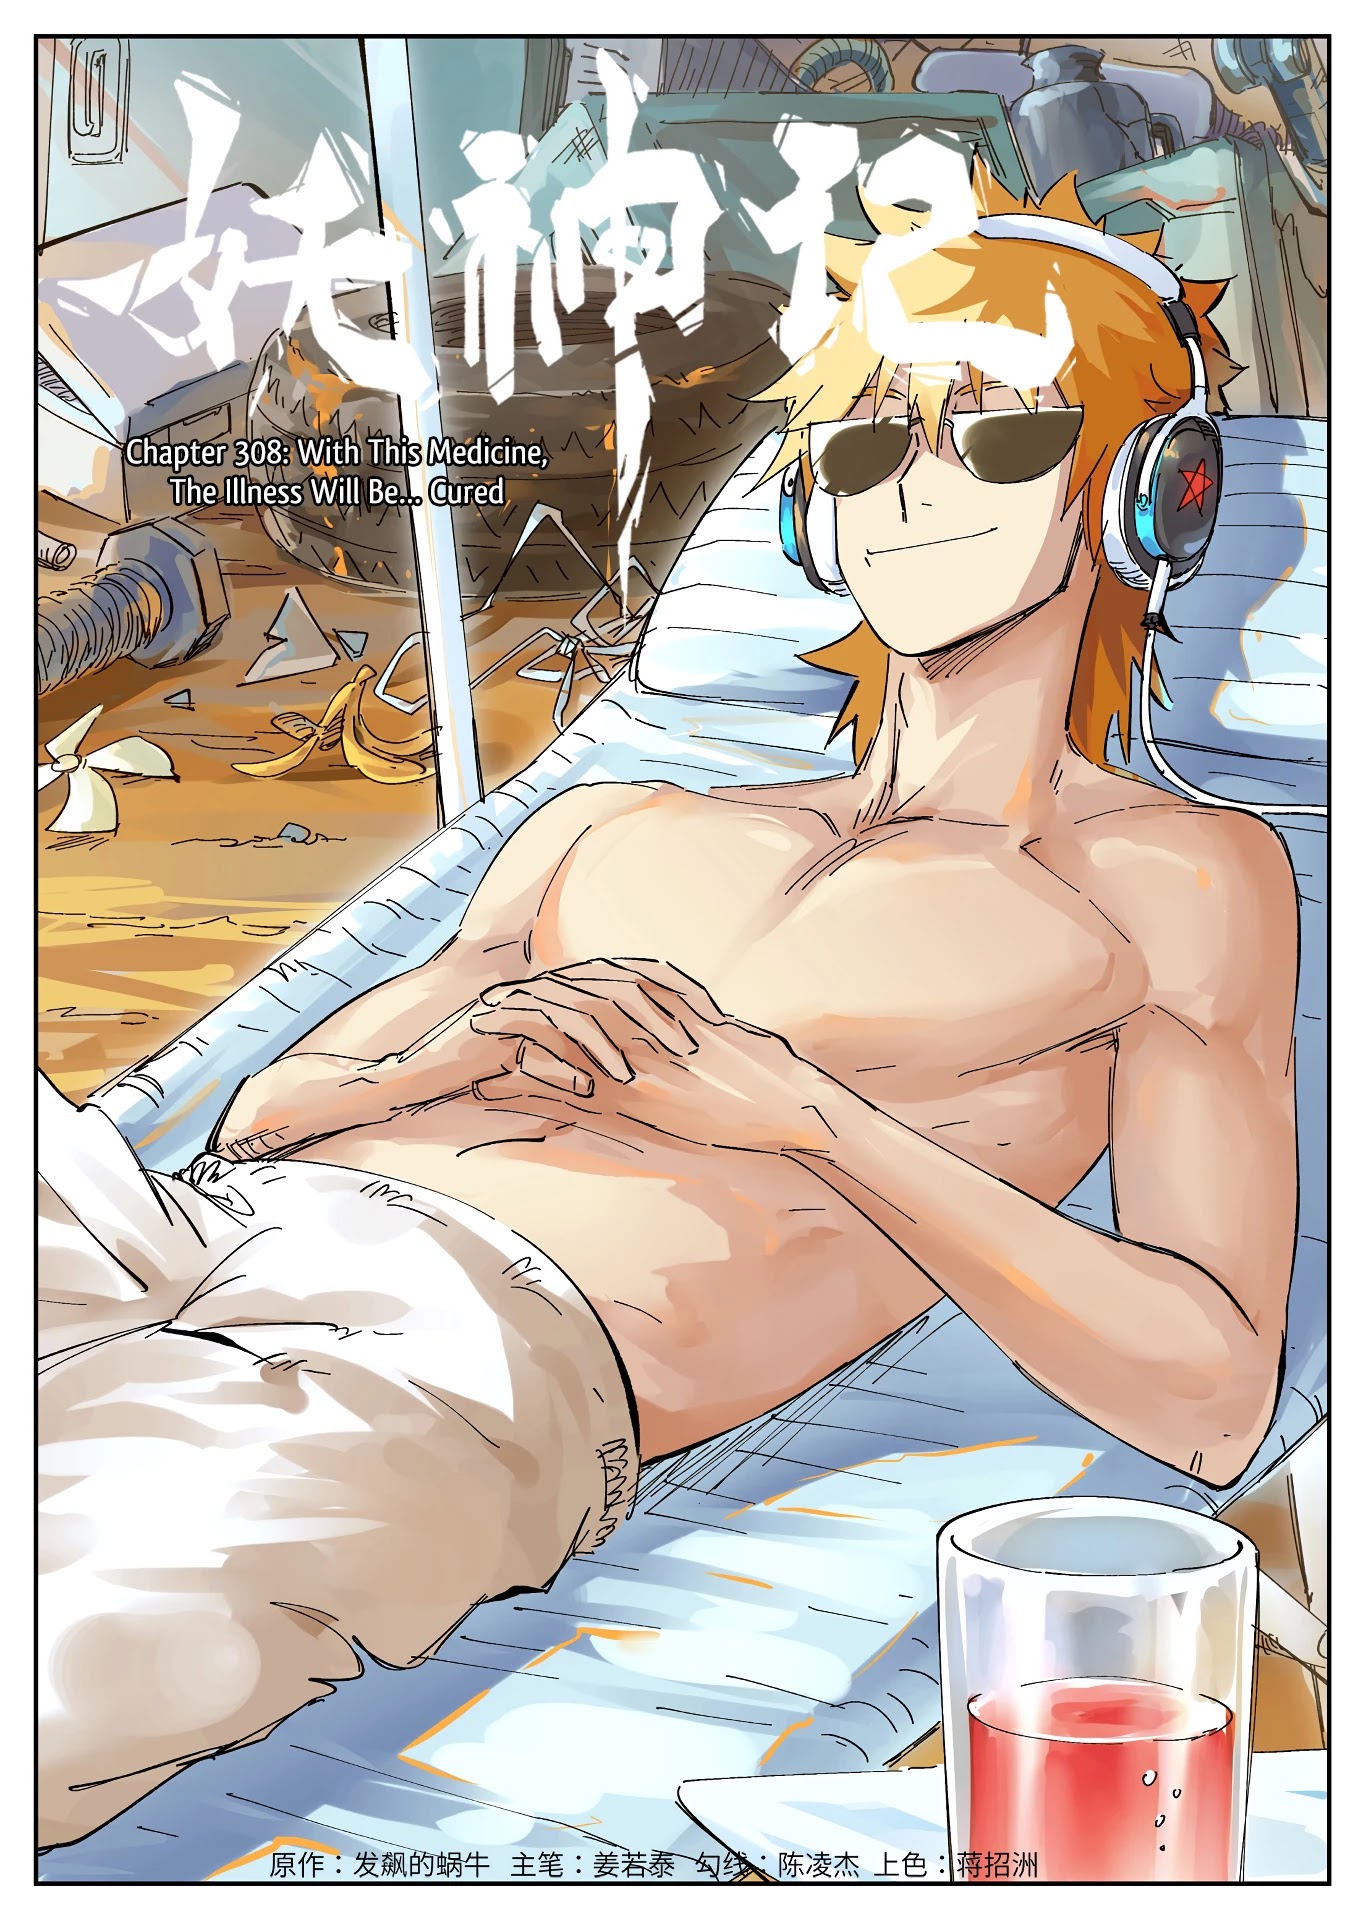 Tales Of Demons And Gods Chapter 308: With This Medicine, The Illness Will Be... Cured - Picture 1